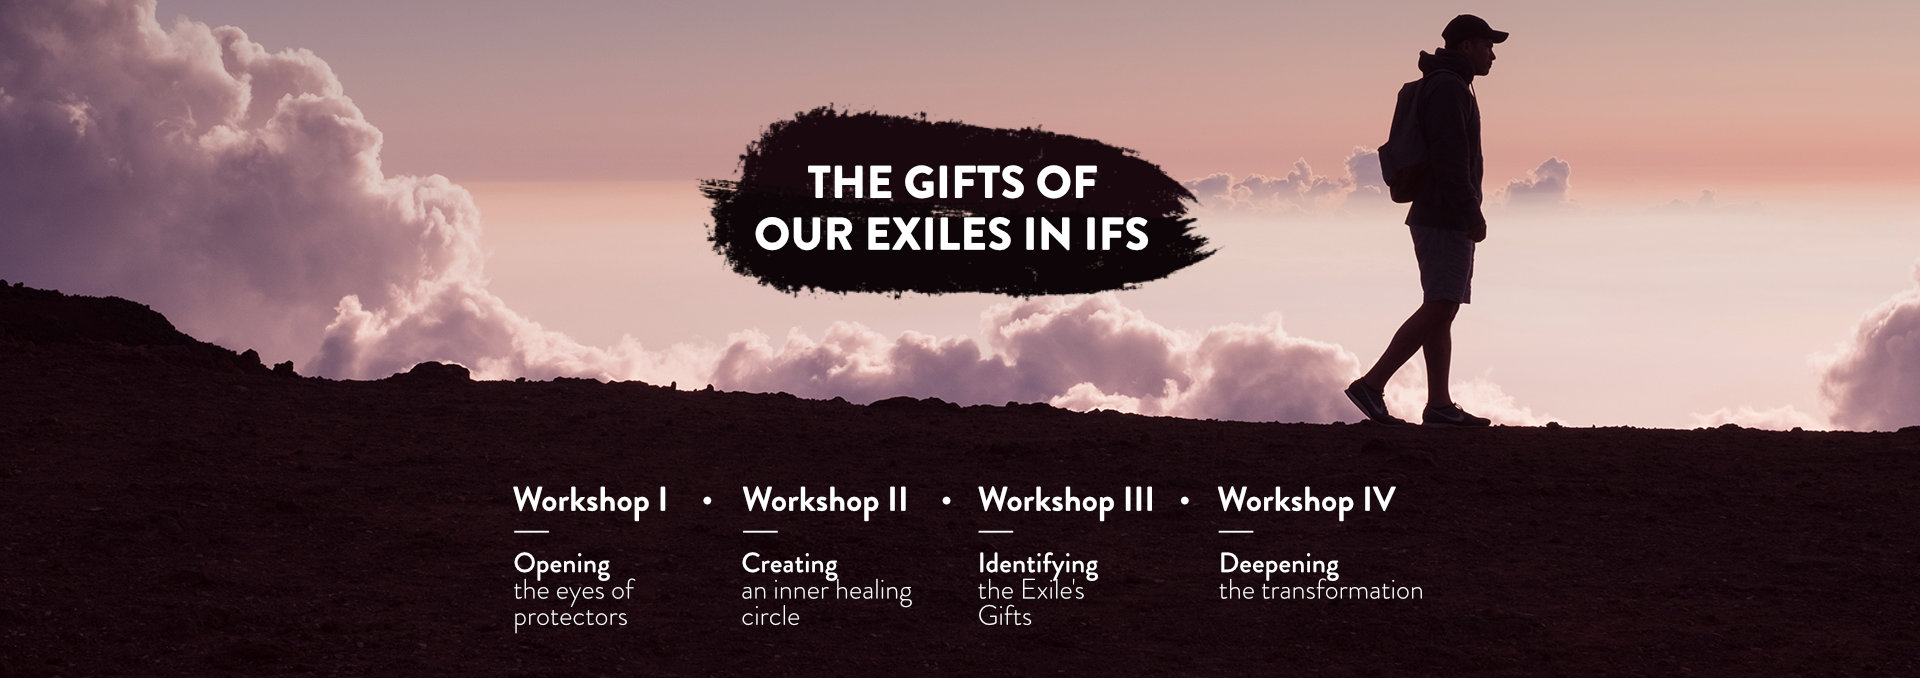 The Gifts of Our Exiles in IFS: Reconnecting with our True Self LP 20